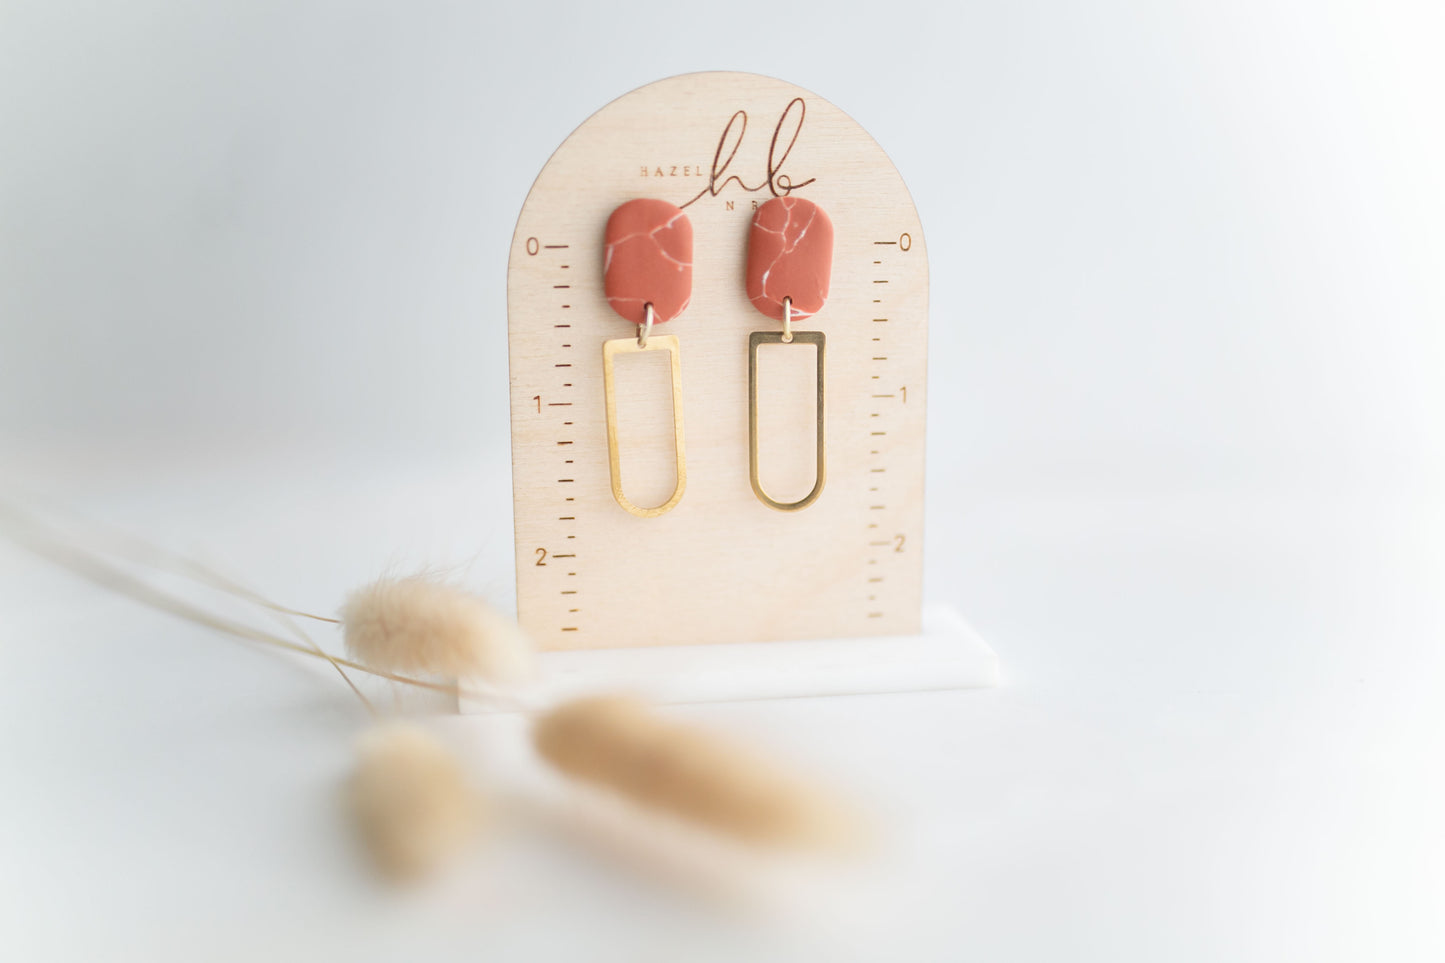 Clay earring | tera-cotta marble | Southwest Collection